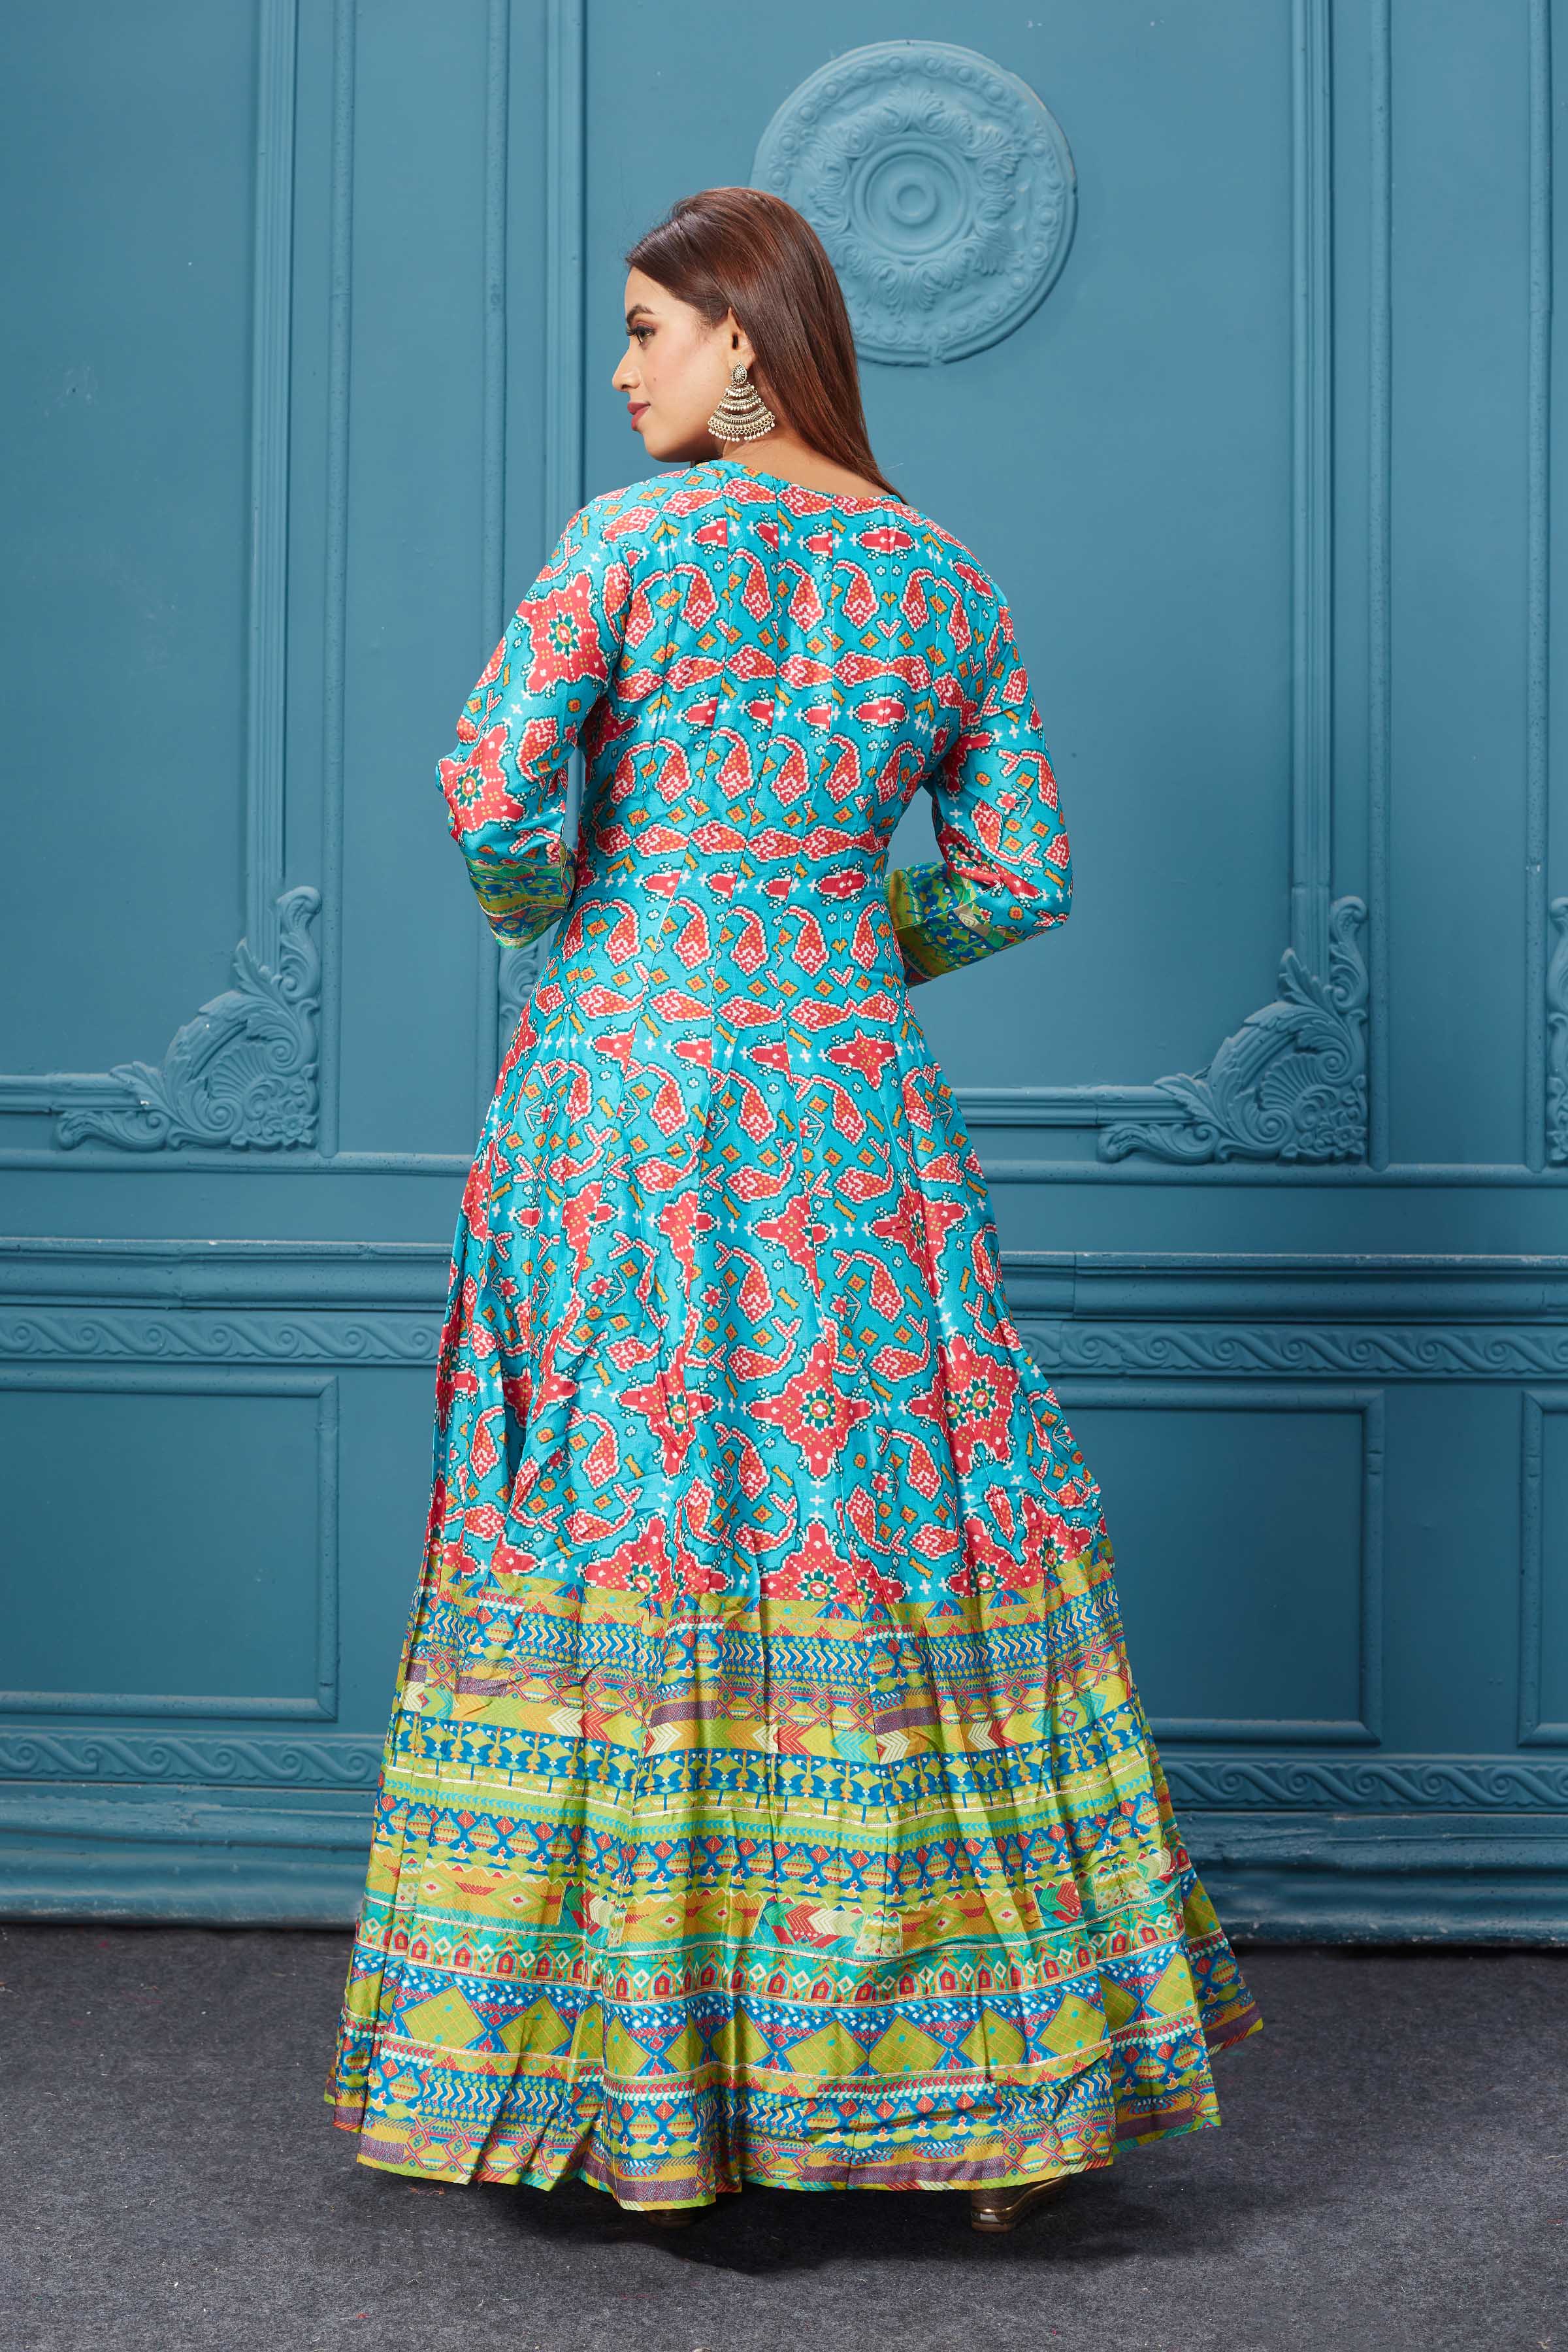 Buy a beautiful light blue & green embroidered silk Anarkali suit. Shop online from Pure Elegance. Dazzle on weddings and special occasions with exquisite Indian designer dresses, sharara suits, Anarkali suits, and wedding lehengas from Pure Elegance Indian fashion store in the USA.